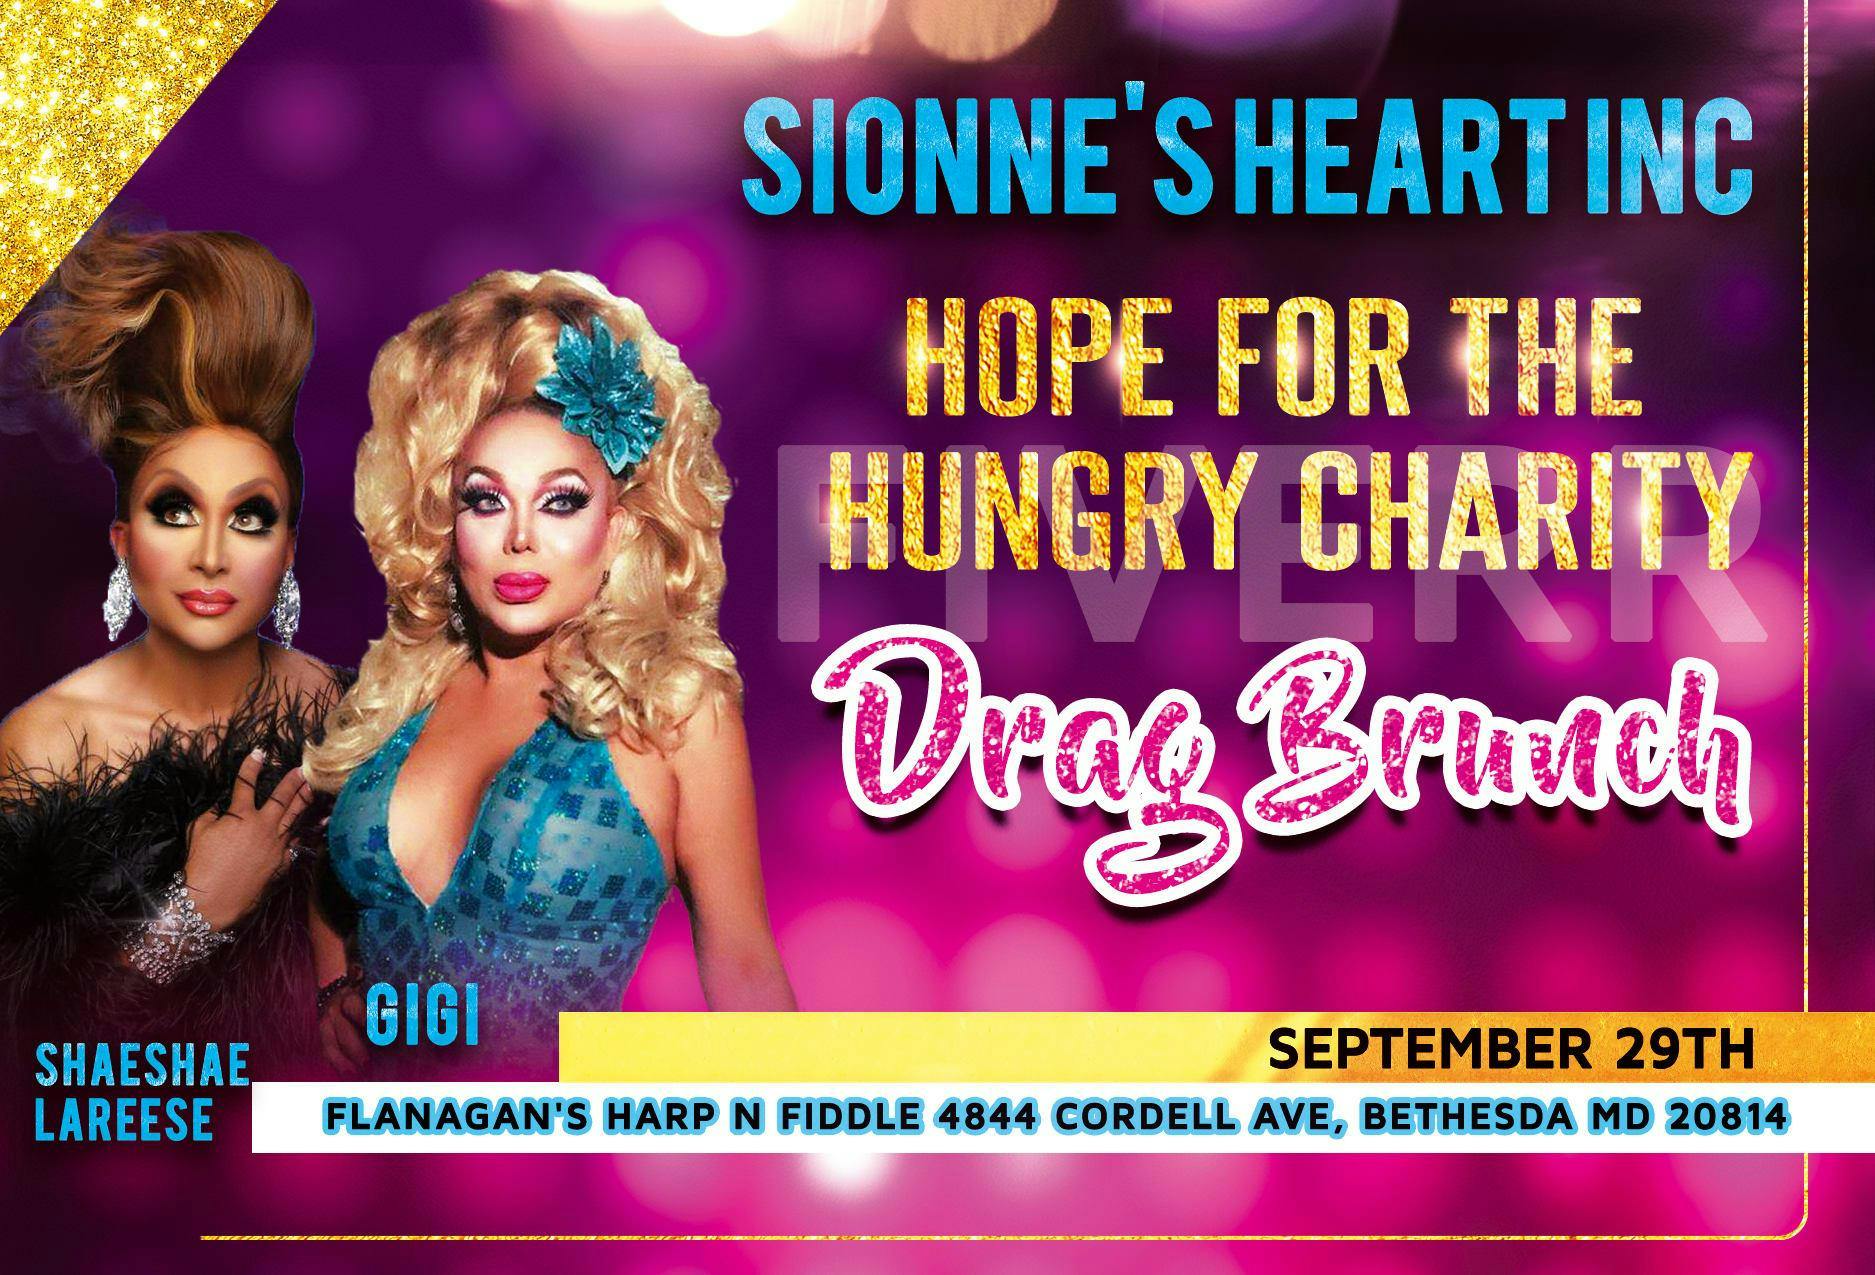 Sionne's Heart Inc. Presents: The Hope For The Hungry Charity Drag Brunch